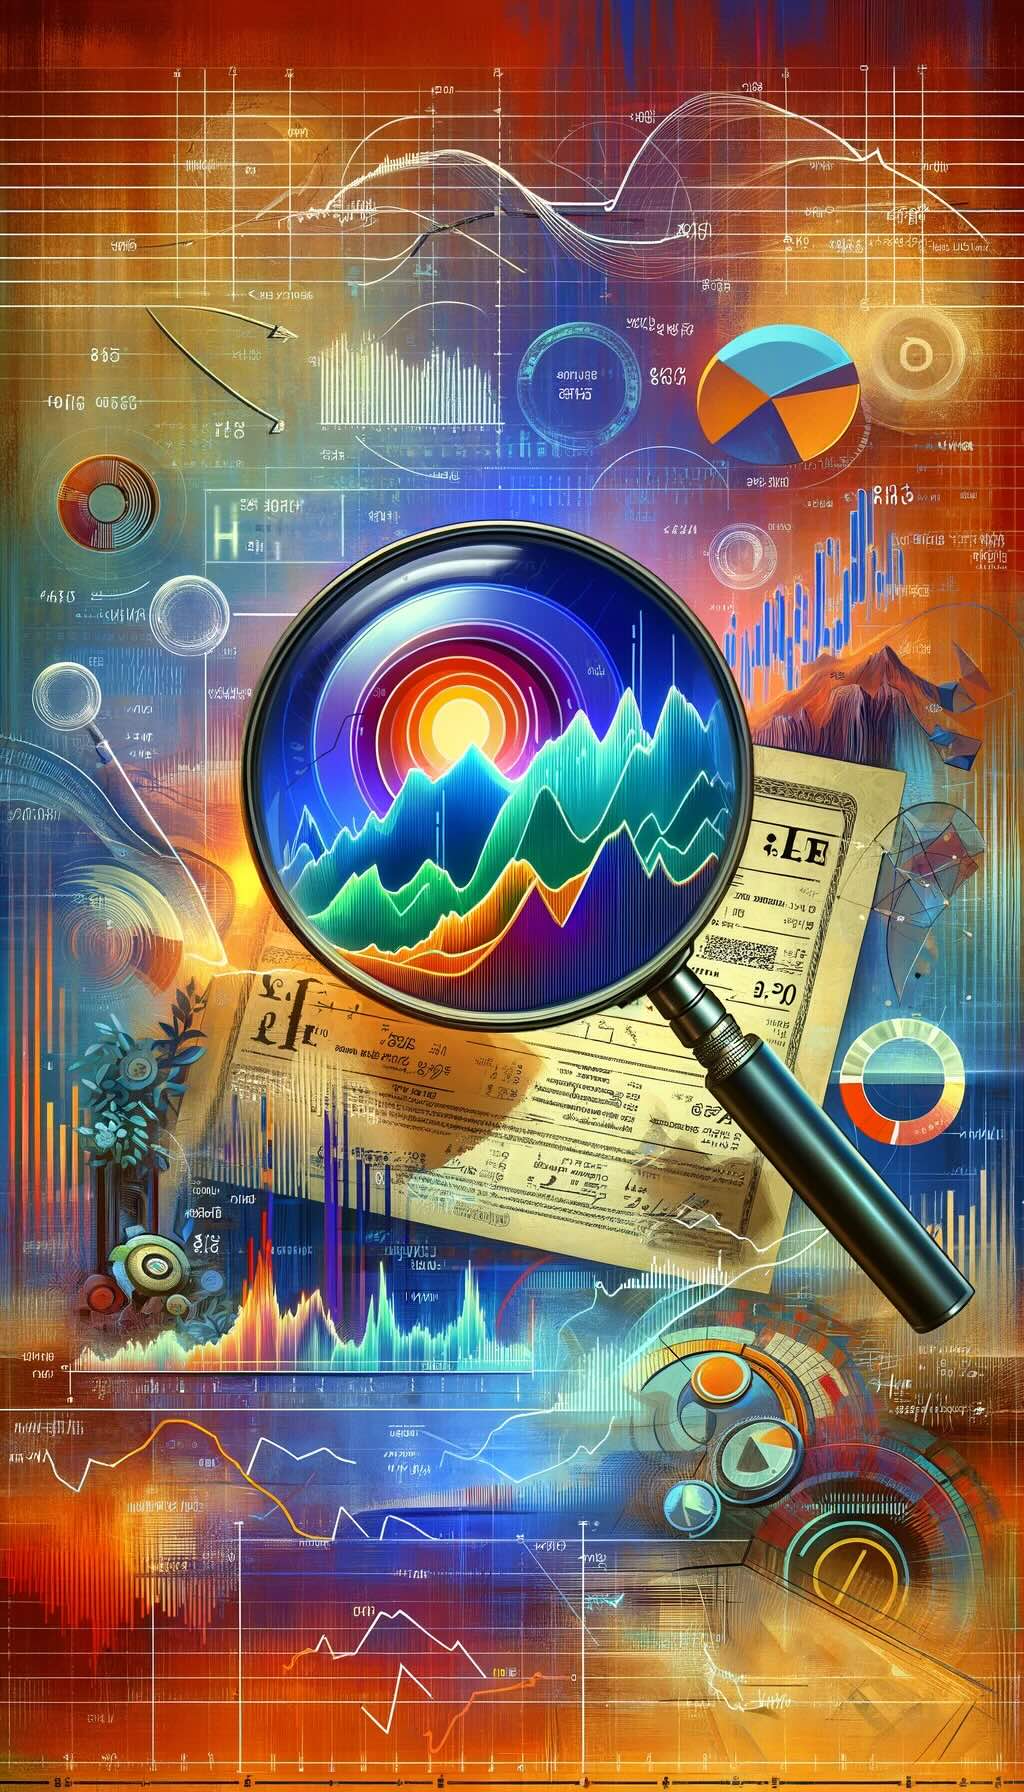 Price to Earnings Ratio (P/E Ratio) through a symbolic portrayal that speaks to value investors. A magnifying glass zeroes in on a stock certificate, beneath which unfolds a landscape of hills and valleys, representing the stock's performance and the fluctuations in market prices over time. This magnifying glass symbolizes the investor's detailed scrutiny, aiming to discern a company's profitability and growth potential by examining its earnings per share (EPS). Contrasting colors and shapes dynamically illustrate the concept of high and low P/E Ratios, distinguishing between undervalued and overvalued stocks. Mathematical equations and financial charts envelop the scene, adding depth to the analytical process. This visual metaphor invites viewers into the meticulous world of value investing, where the P/E Ratio serves as a critical tool in uncovering potential investment opportunities.